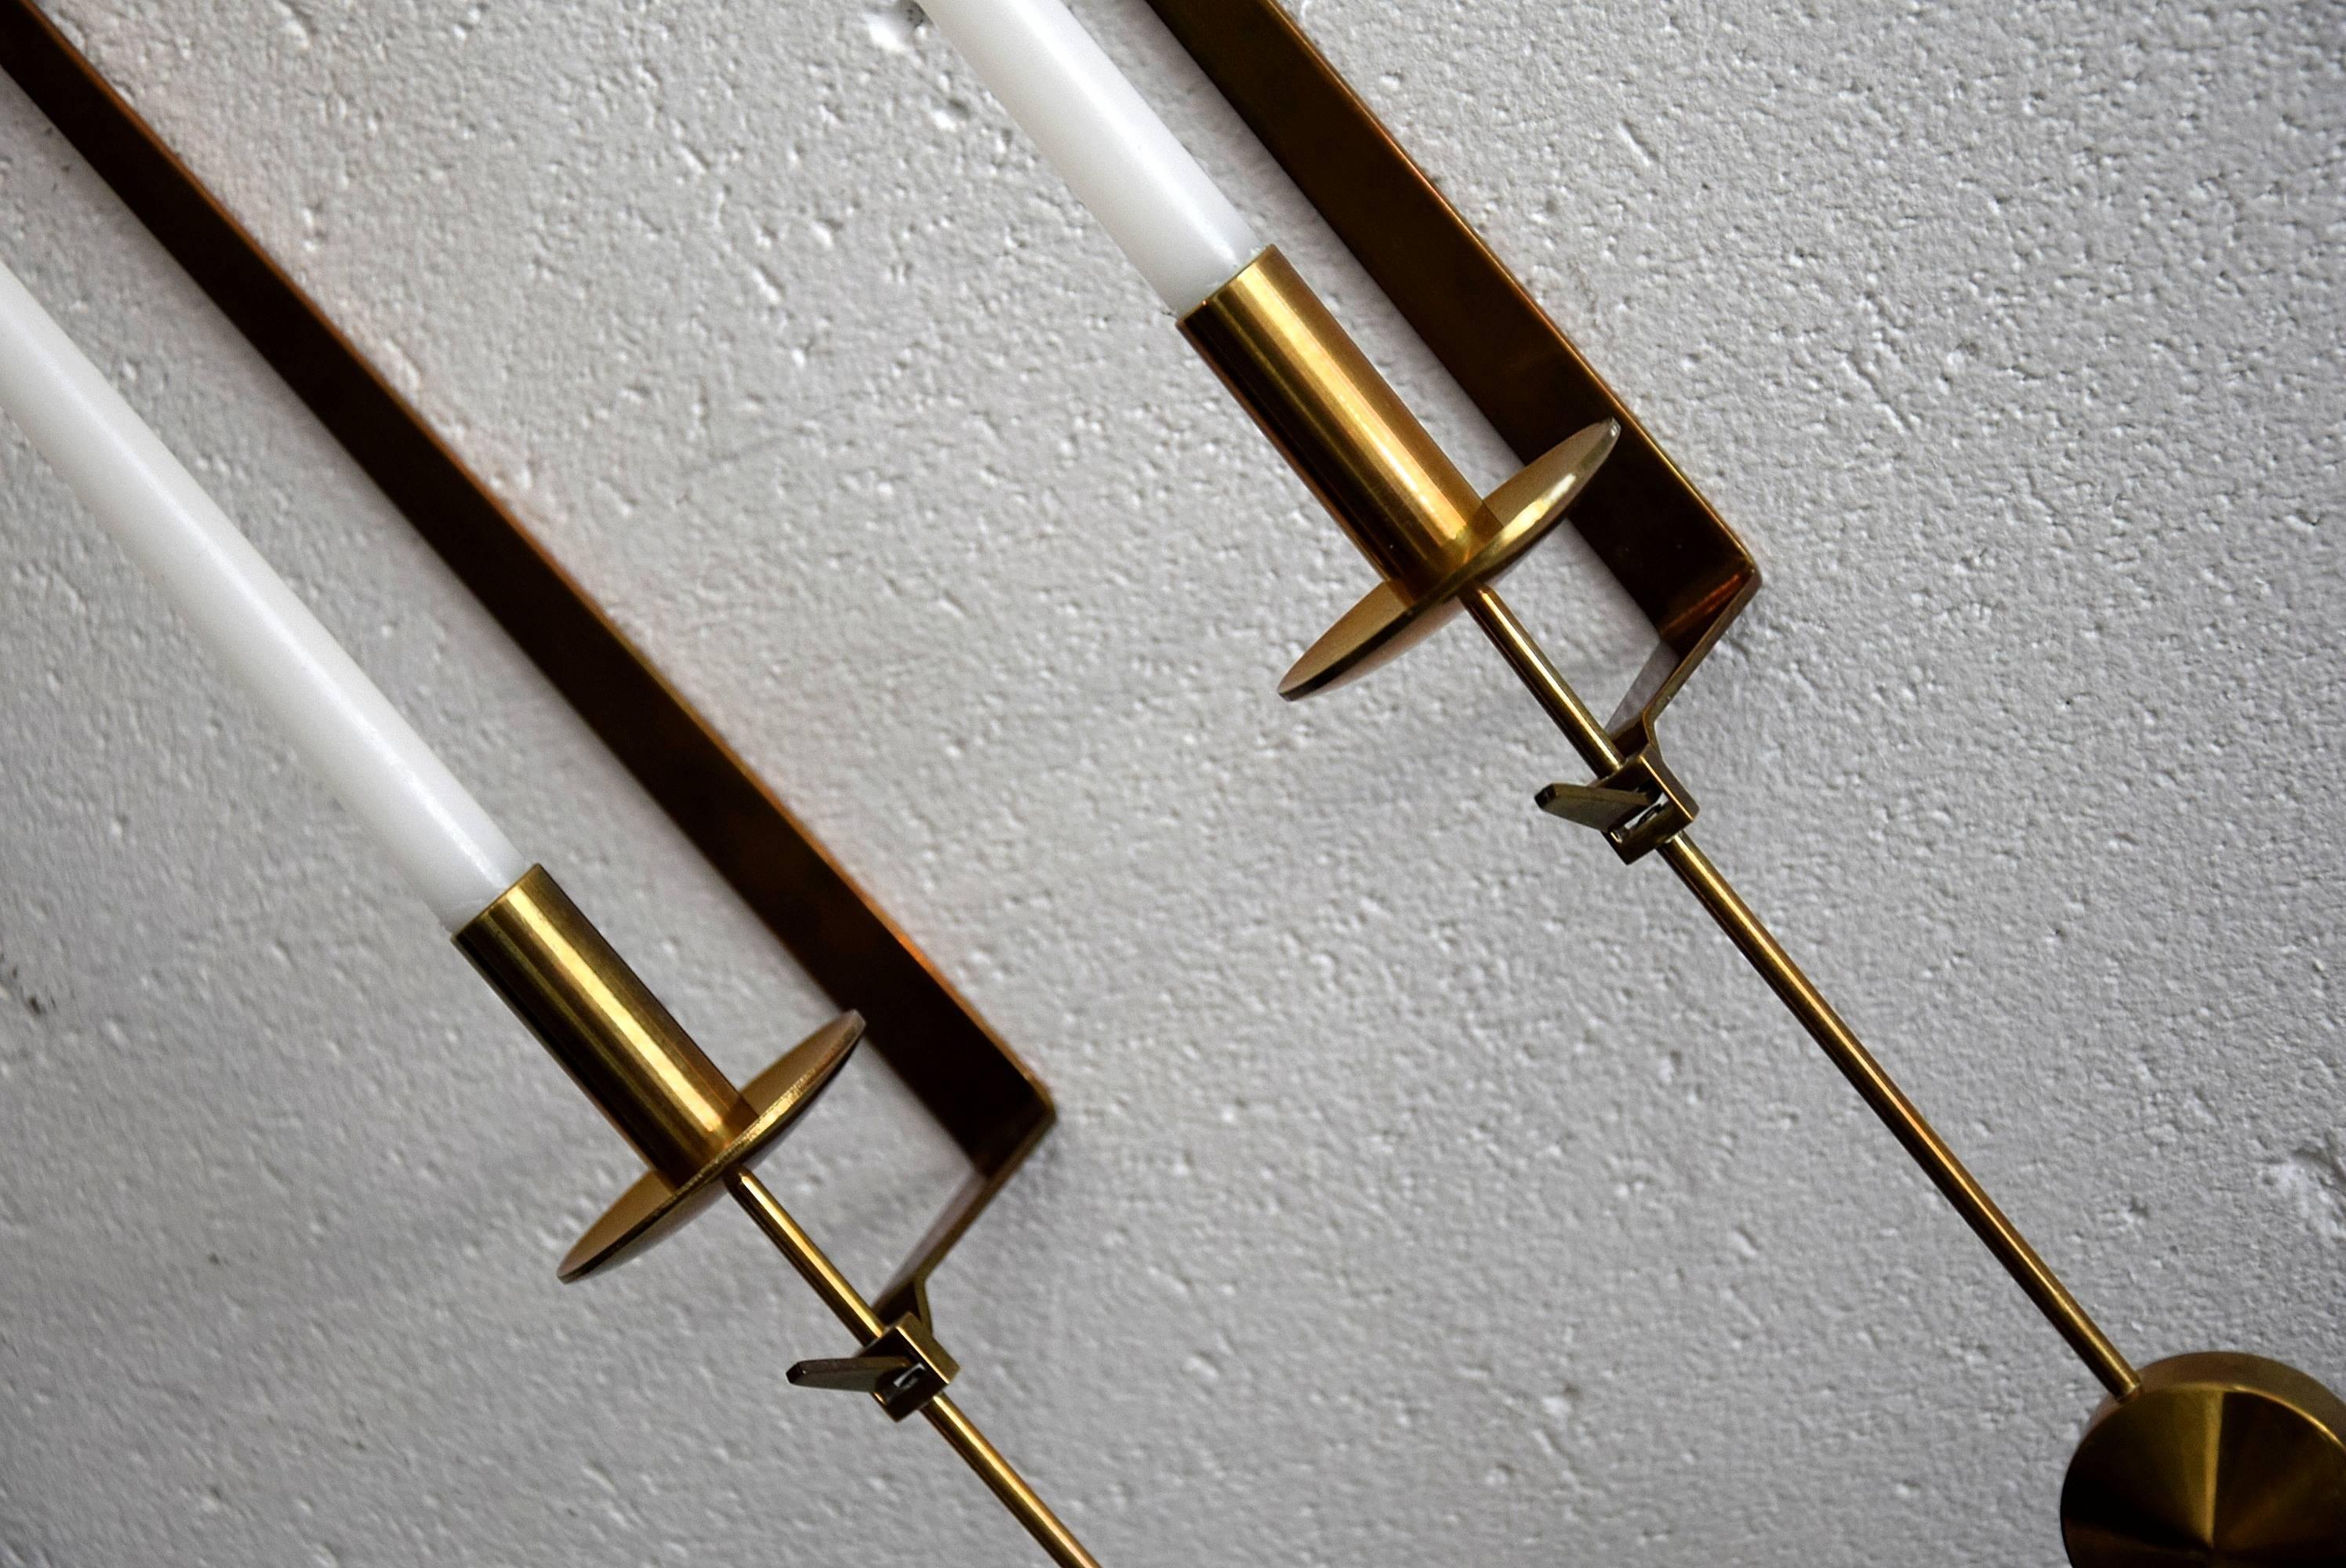 Pierre Forssell pair of candle sconces for Skultana

Elegant and sophisticated pair of pendel wall candleholders designed by Pierre Forssell for Skultana, Sweden, in the 1950s.

Stamped on the back with makers mark.

Pierre Forssell was an